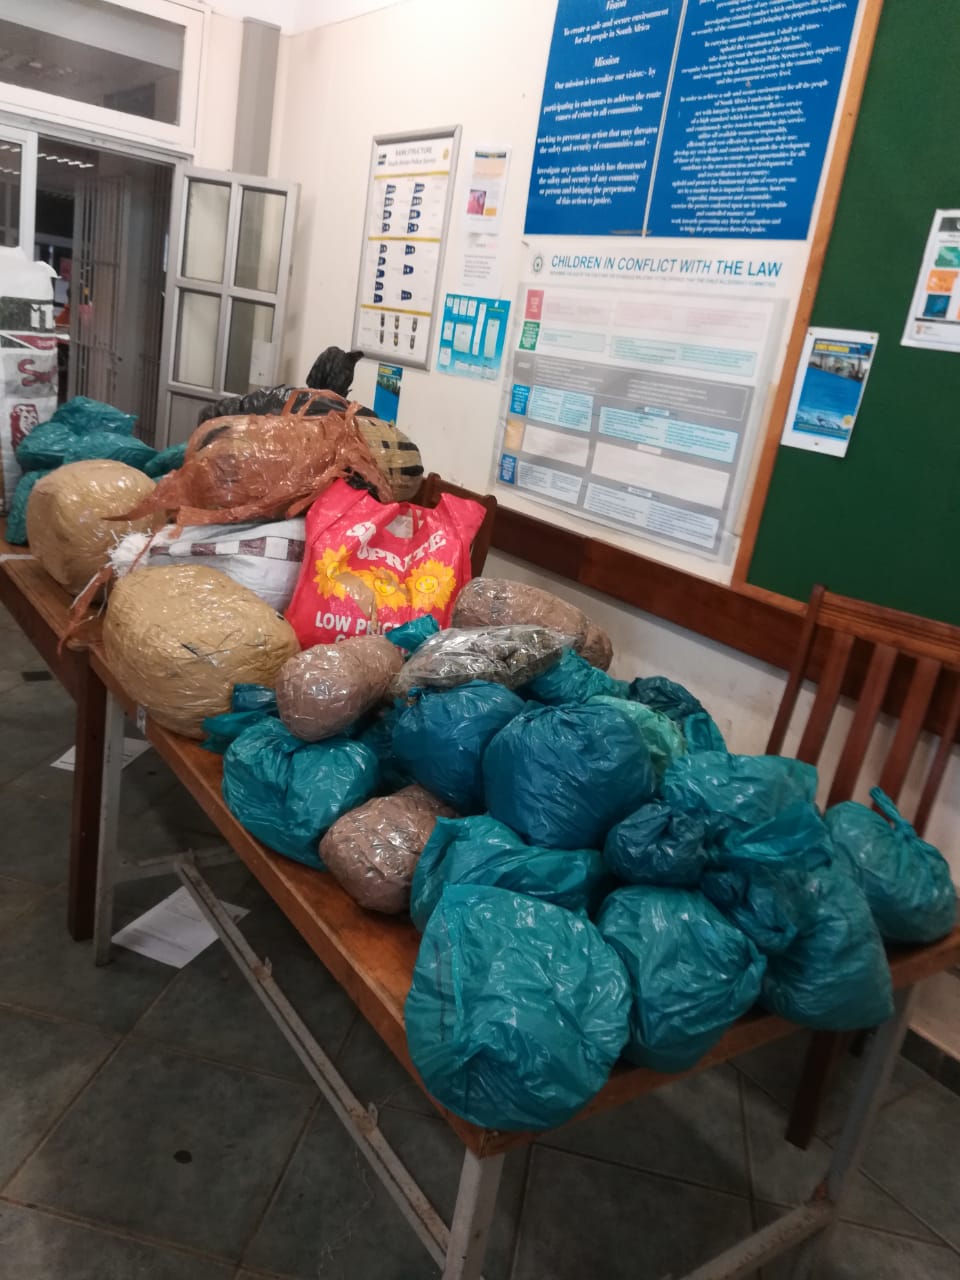 Man arrested with large quantity of dagga in Durban